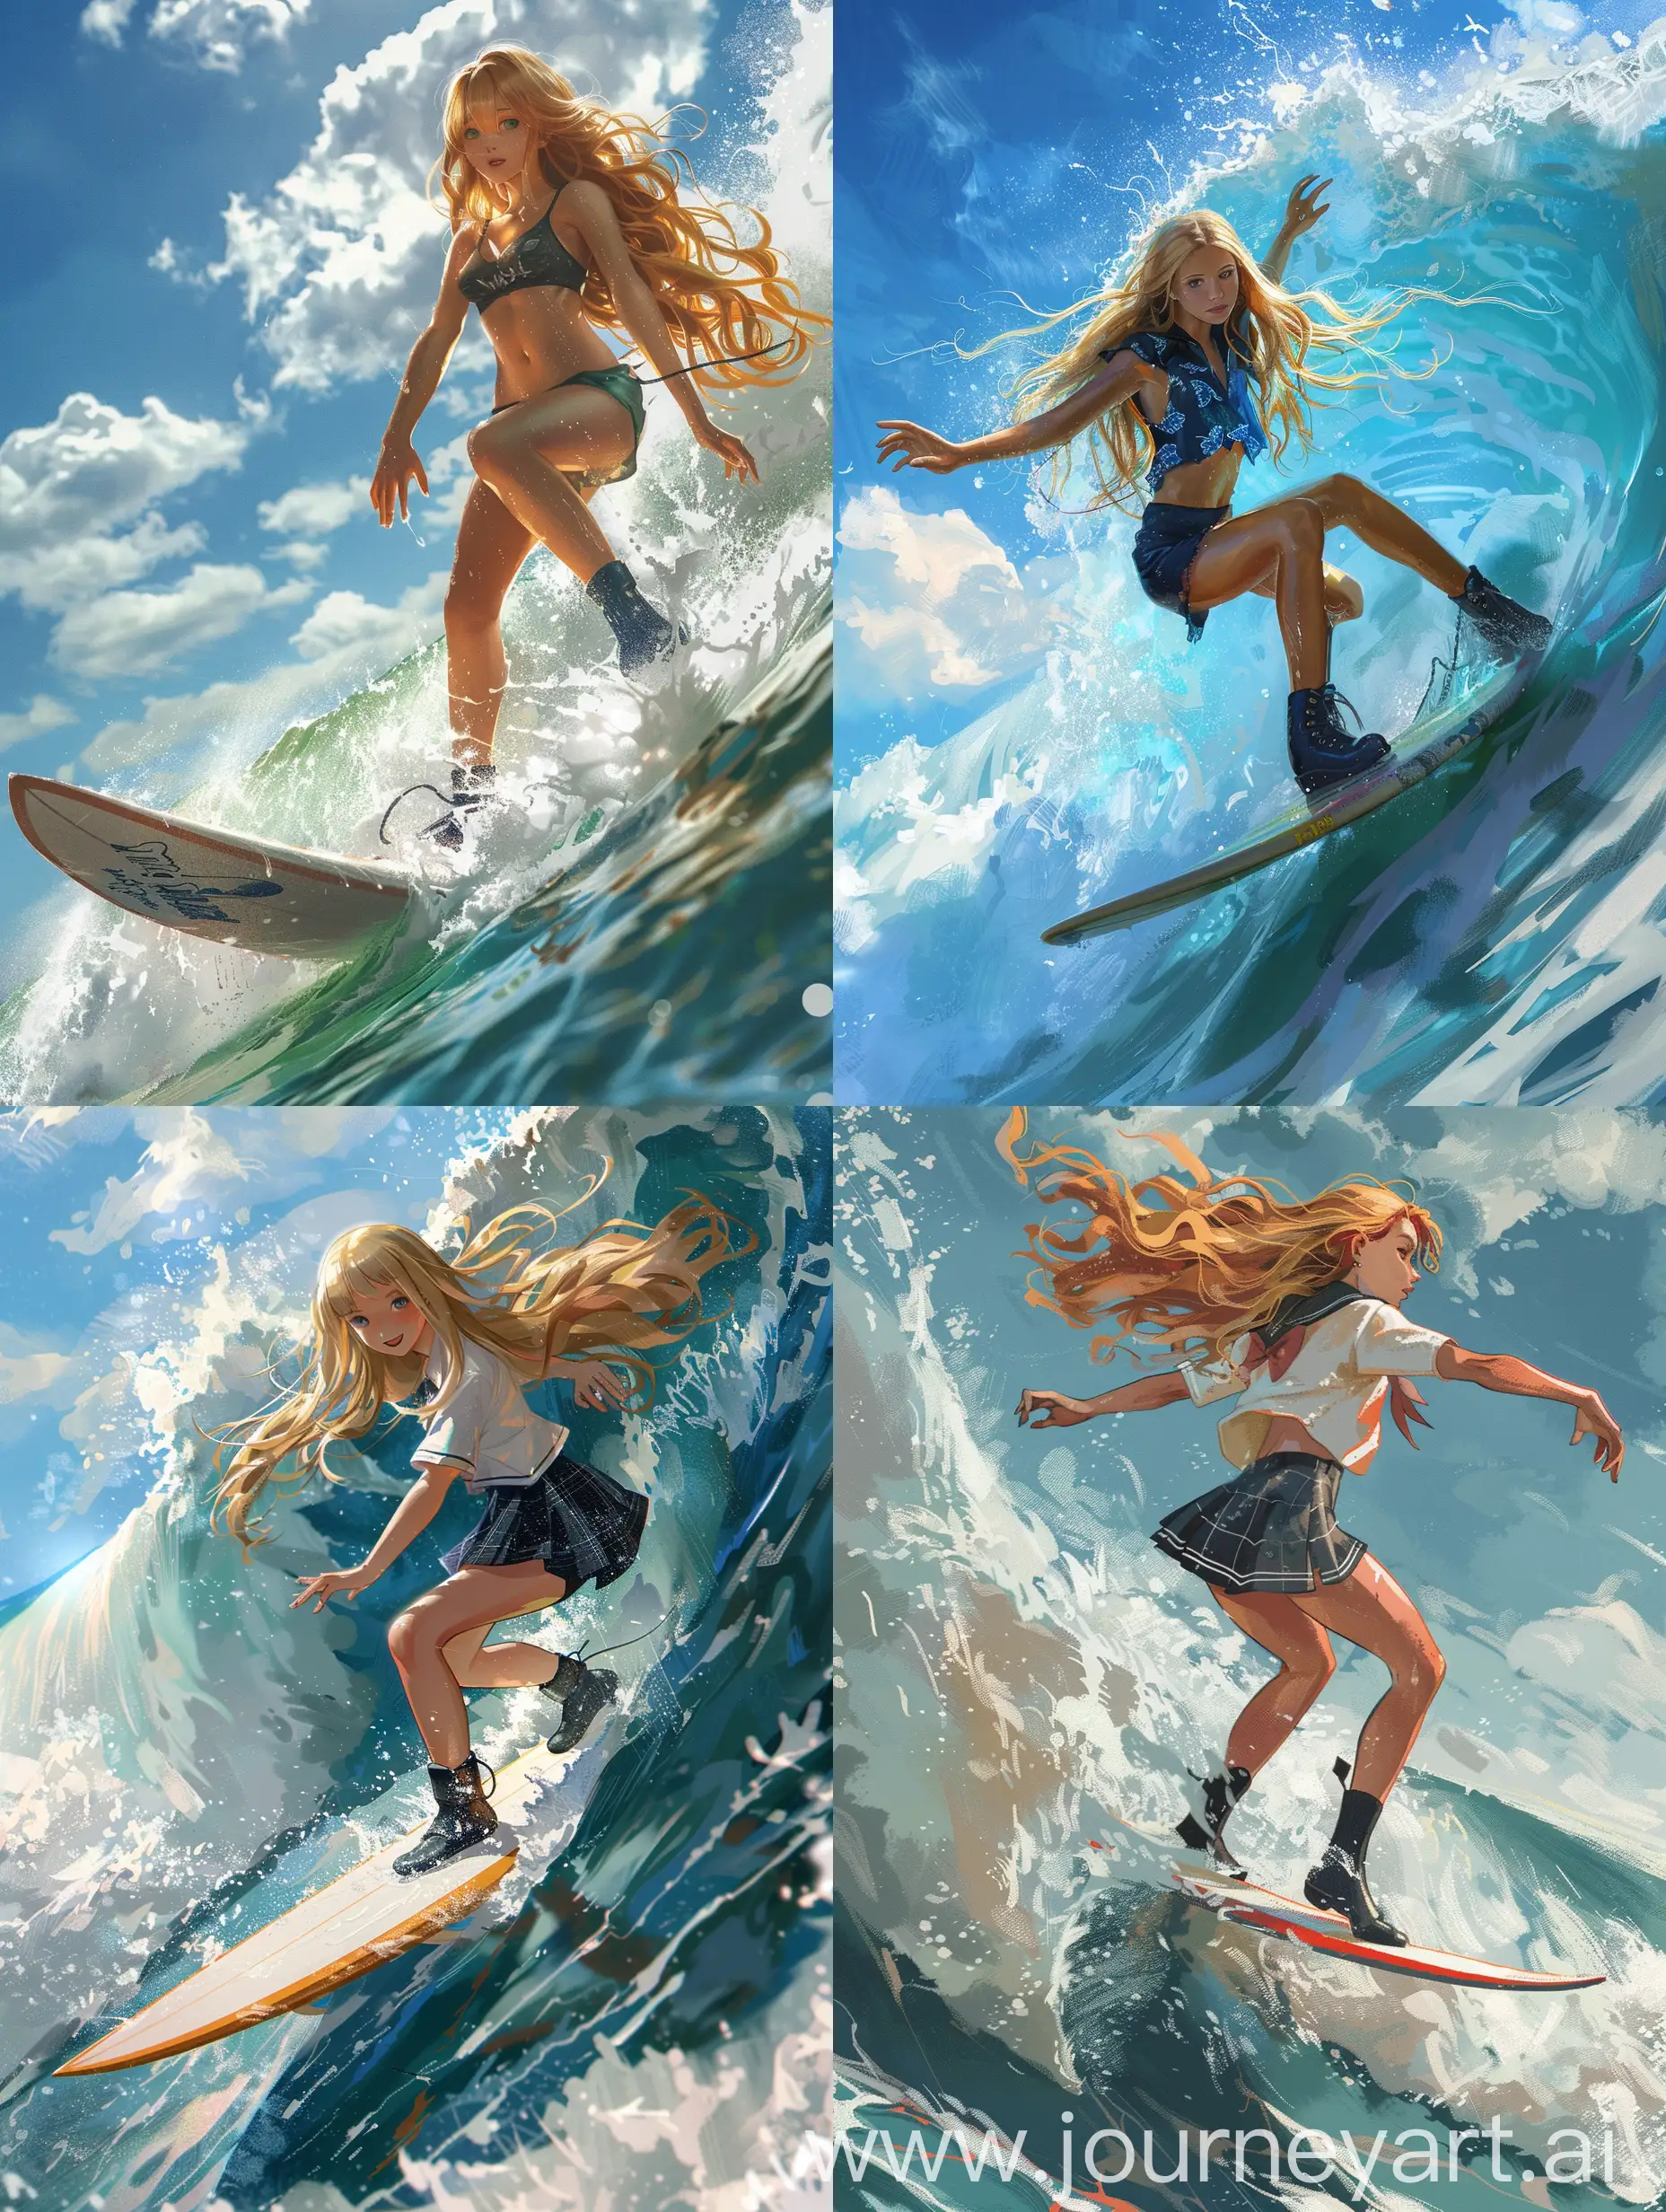 1  girl,   young , 22 years old,  surfing, at sea, on a surfboard, blonde long hair, , thick legs, school uniform, black long boots, waves, sunny day, no illustration, real person, natural
